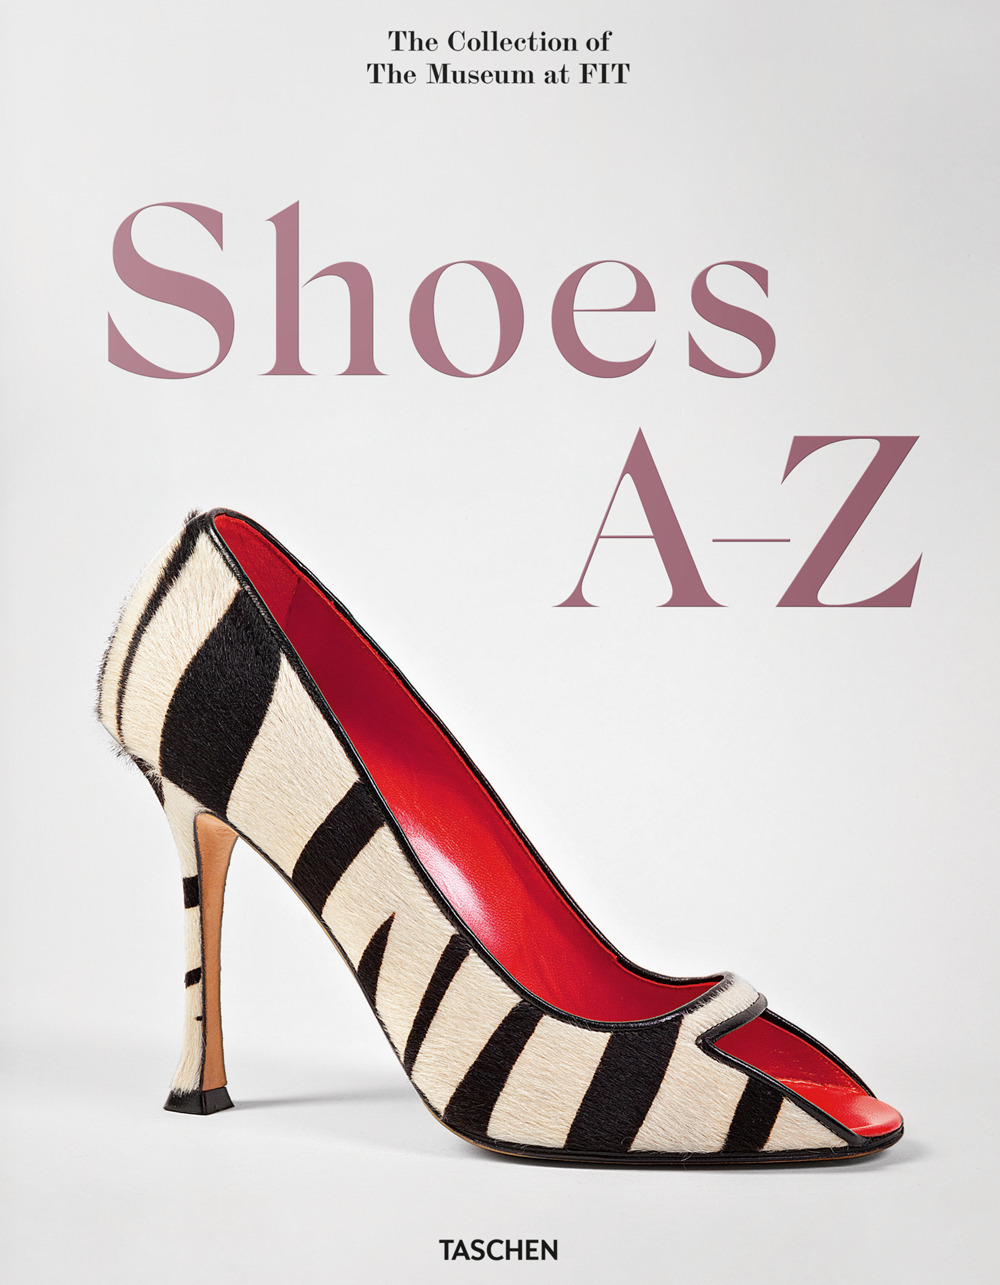 Shoes A-Z. The collection of the museum at FIT. Ediz. inglese, francese e tedesca